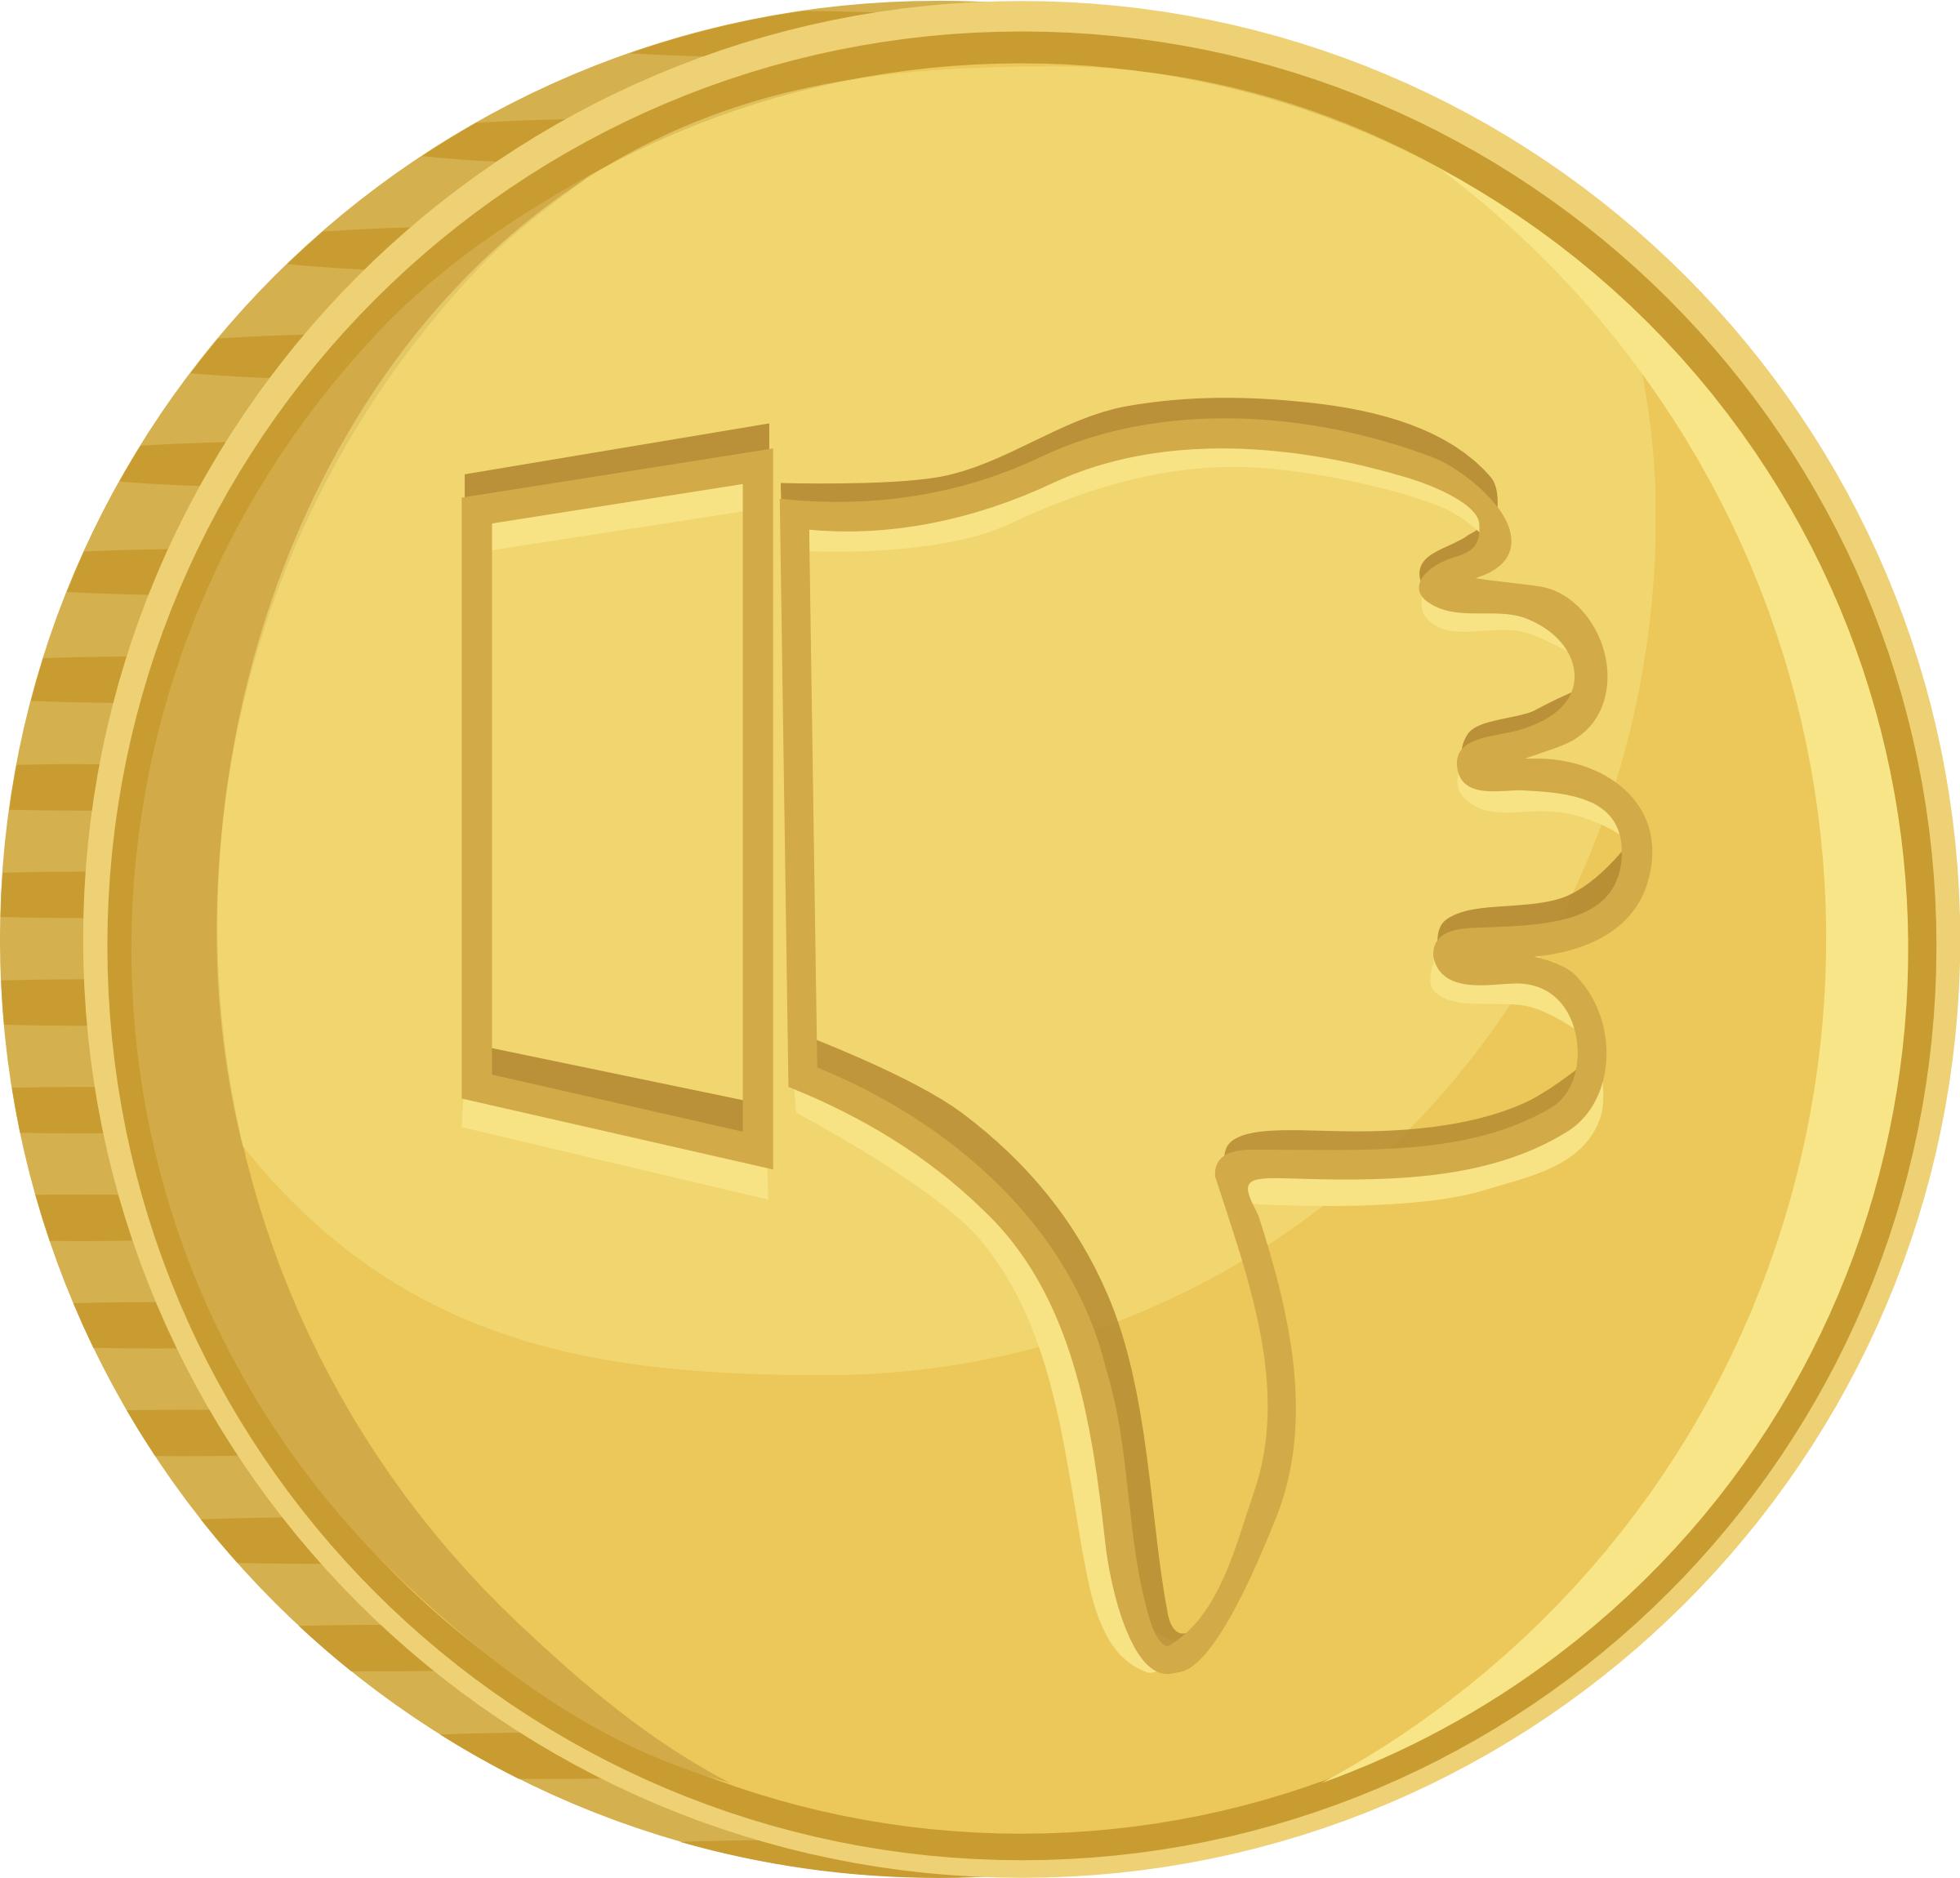 Coin thumbs down icons